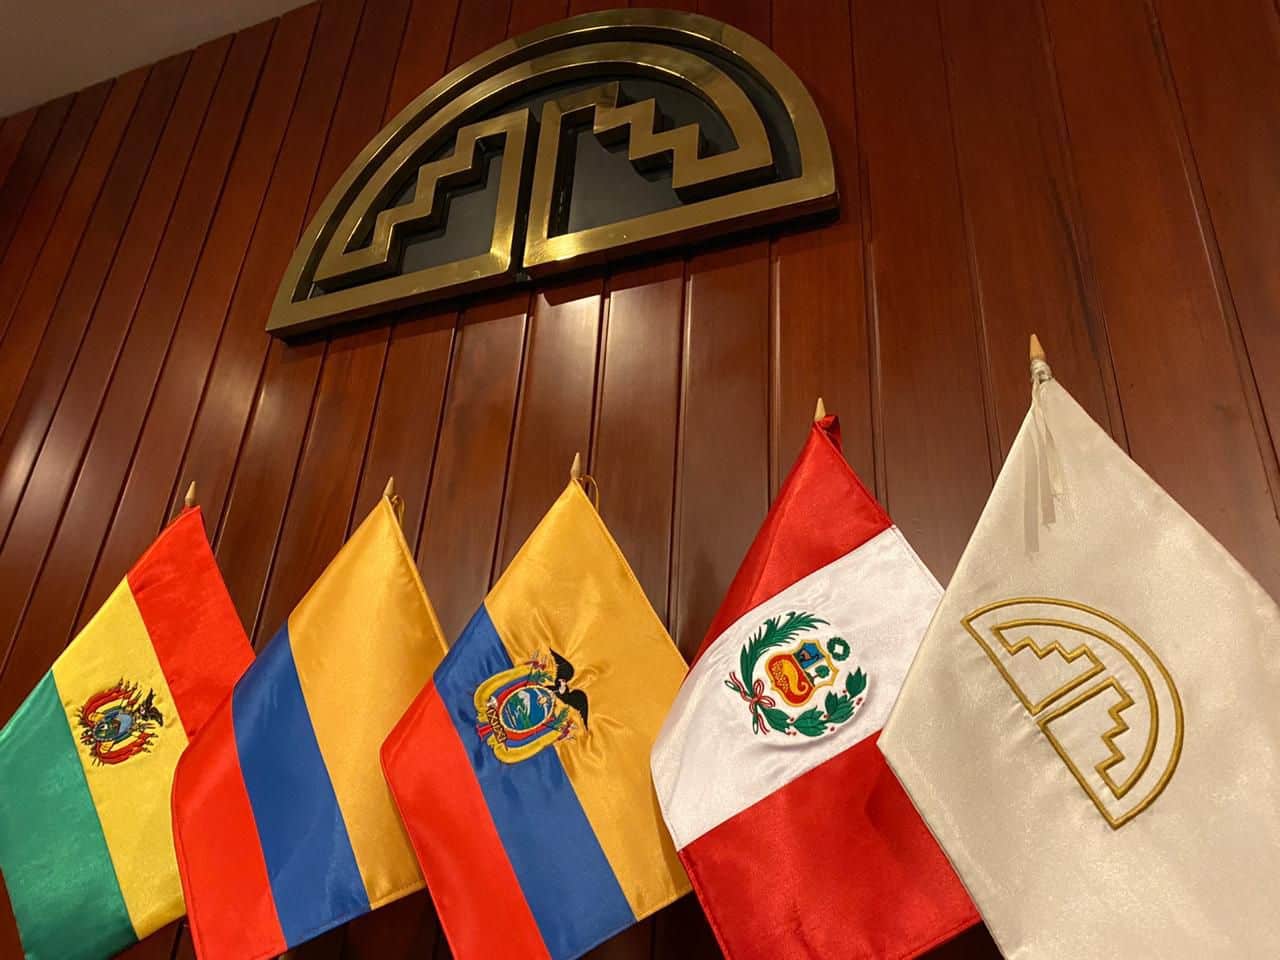 (From left to right) Flags of Bolivia, Colombia, Ecuador, Peru, and the Andean Community of Nations. File photo.